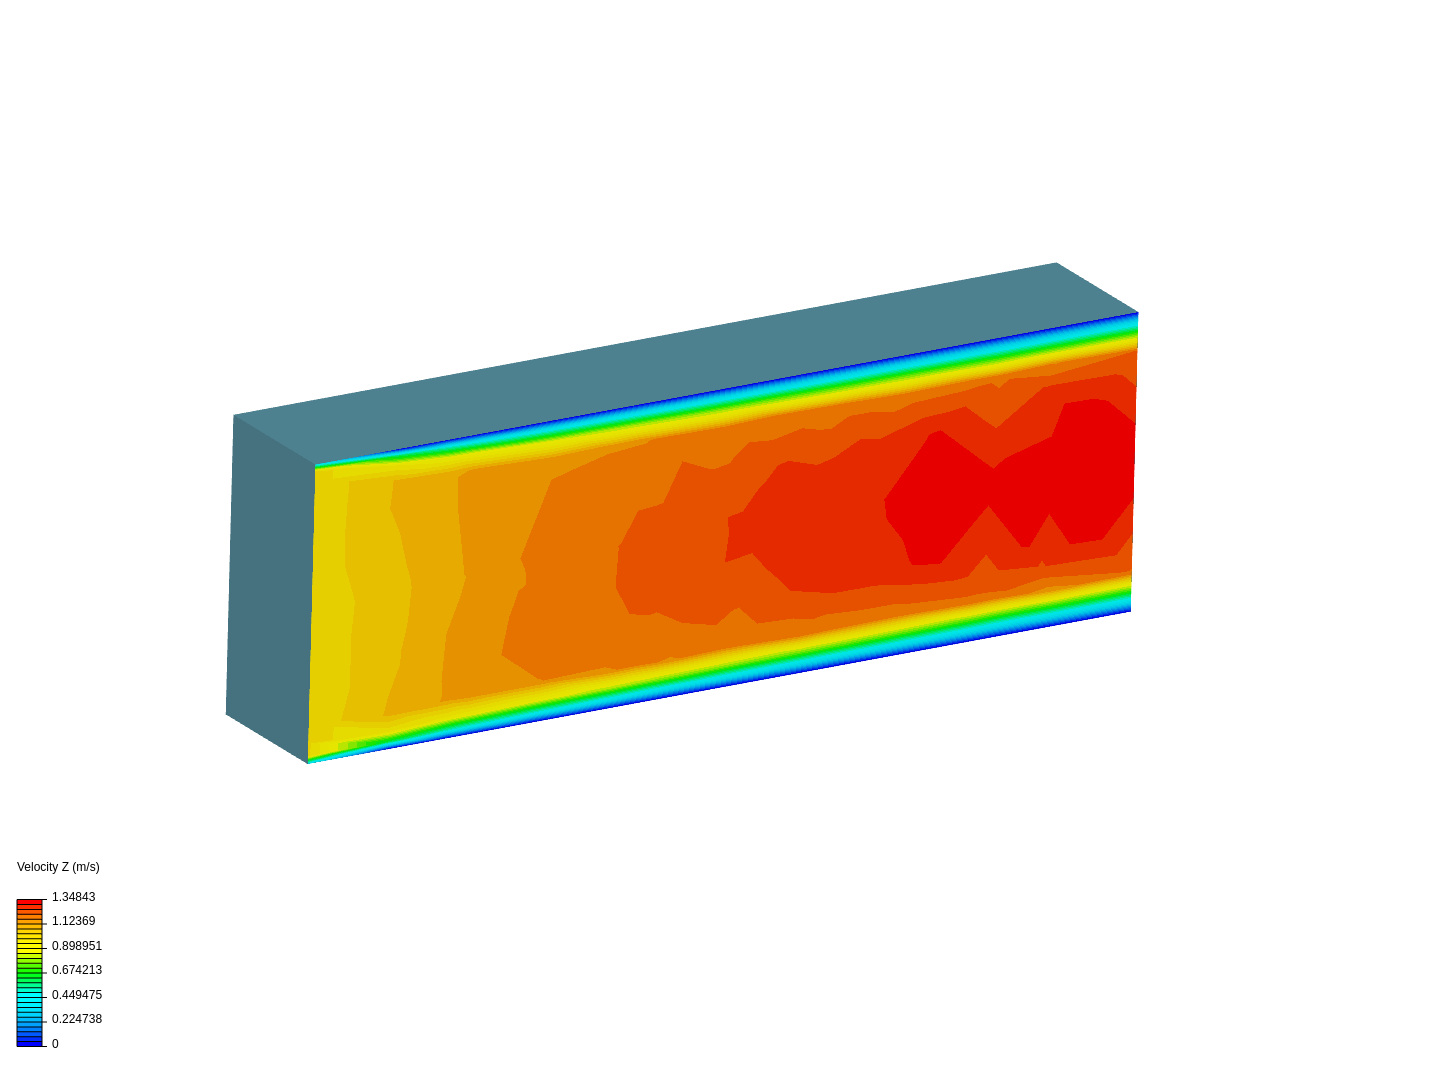 Flow in a box (boundary layers) image